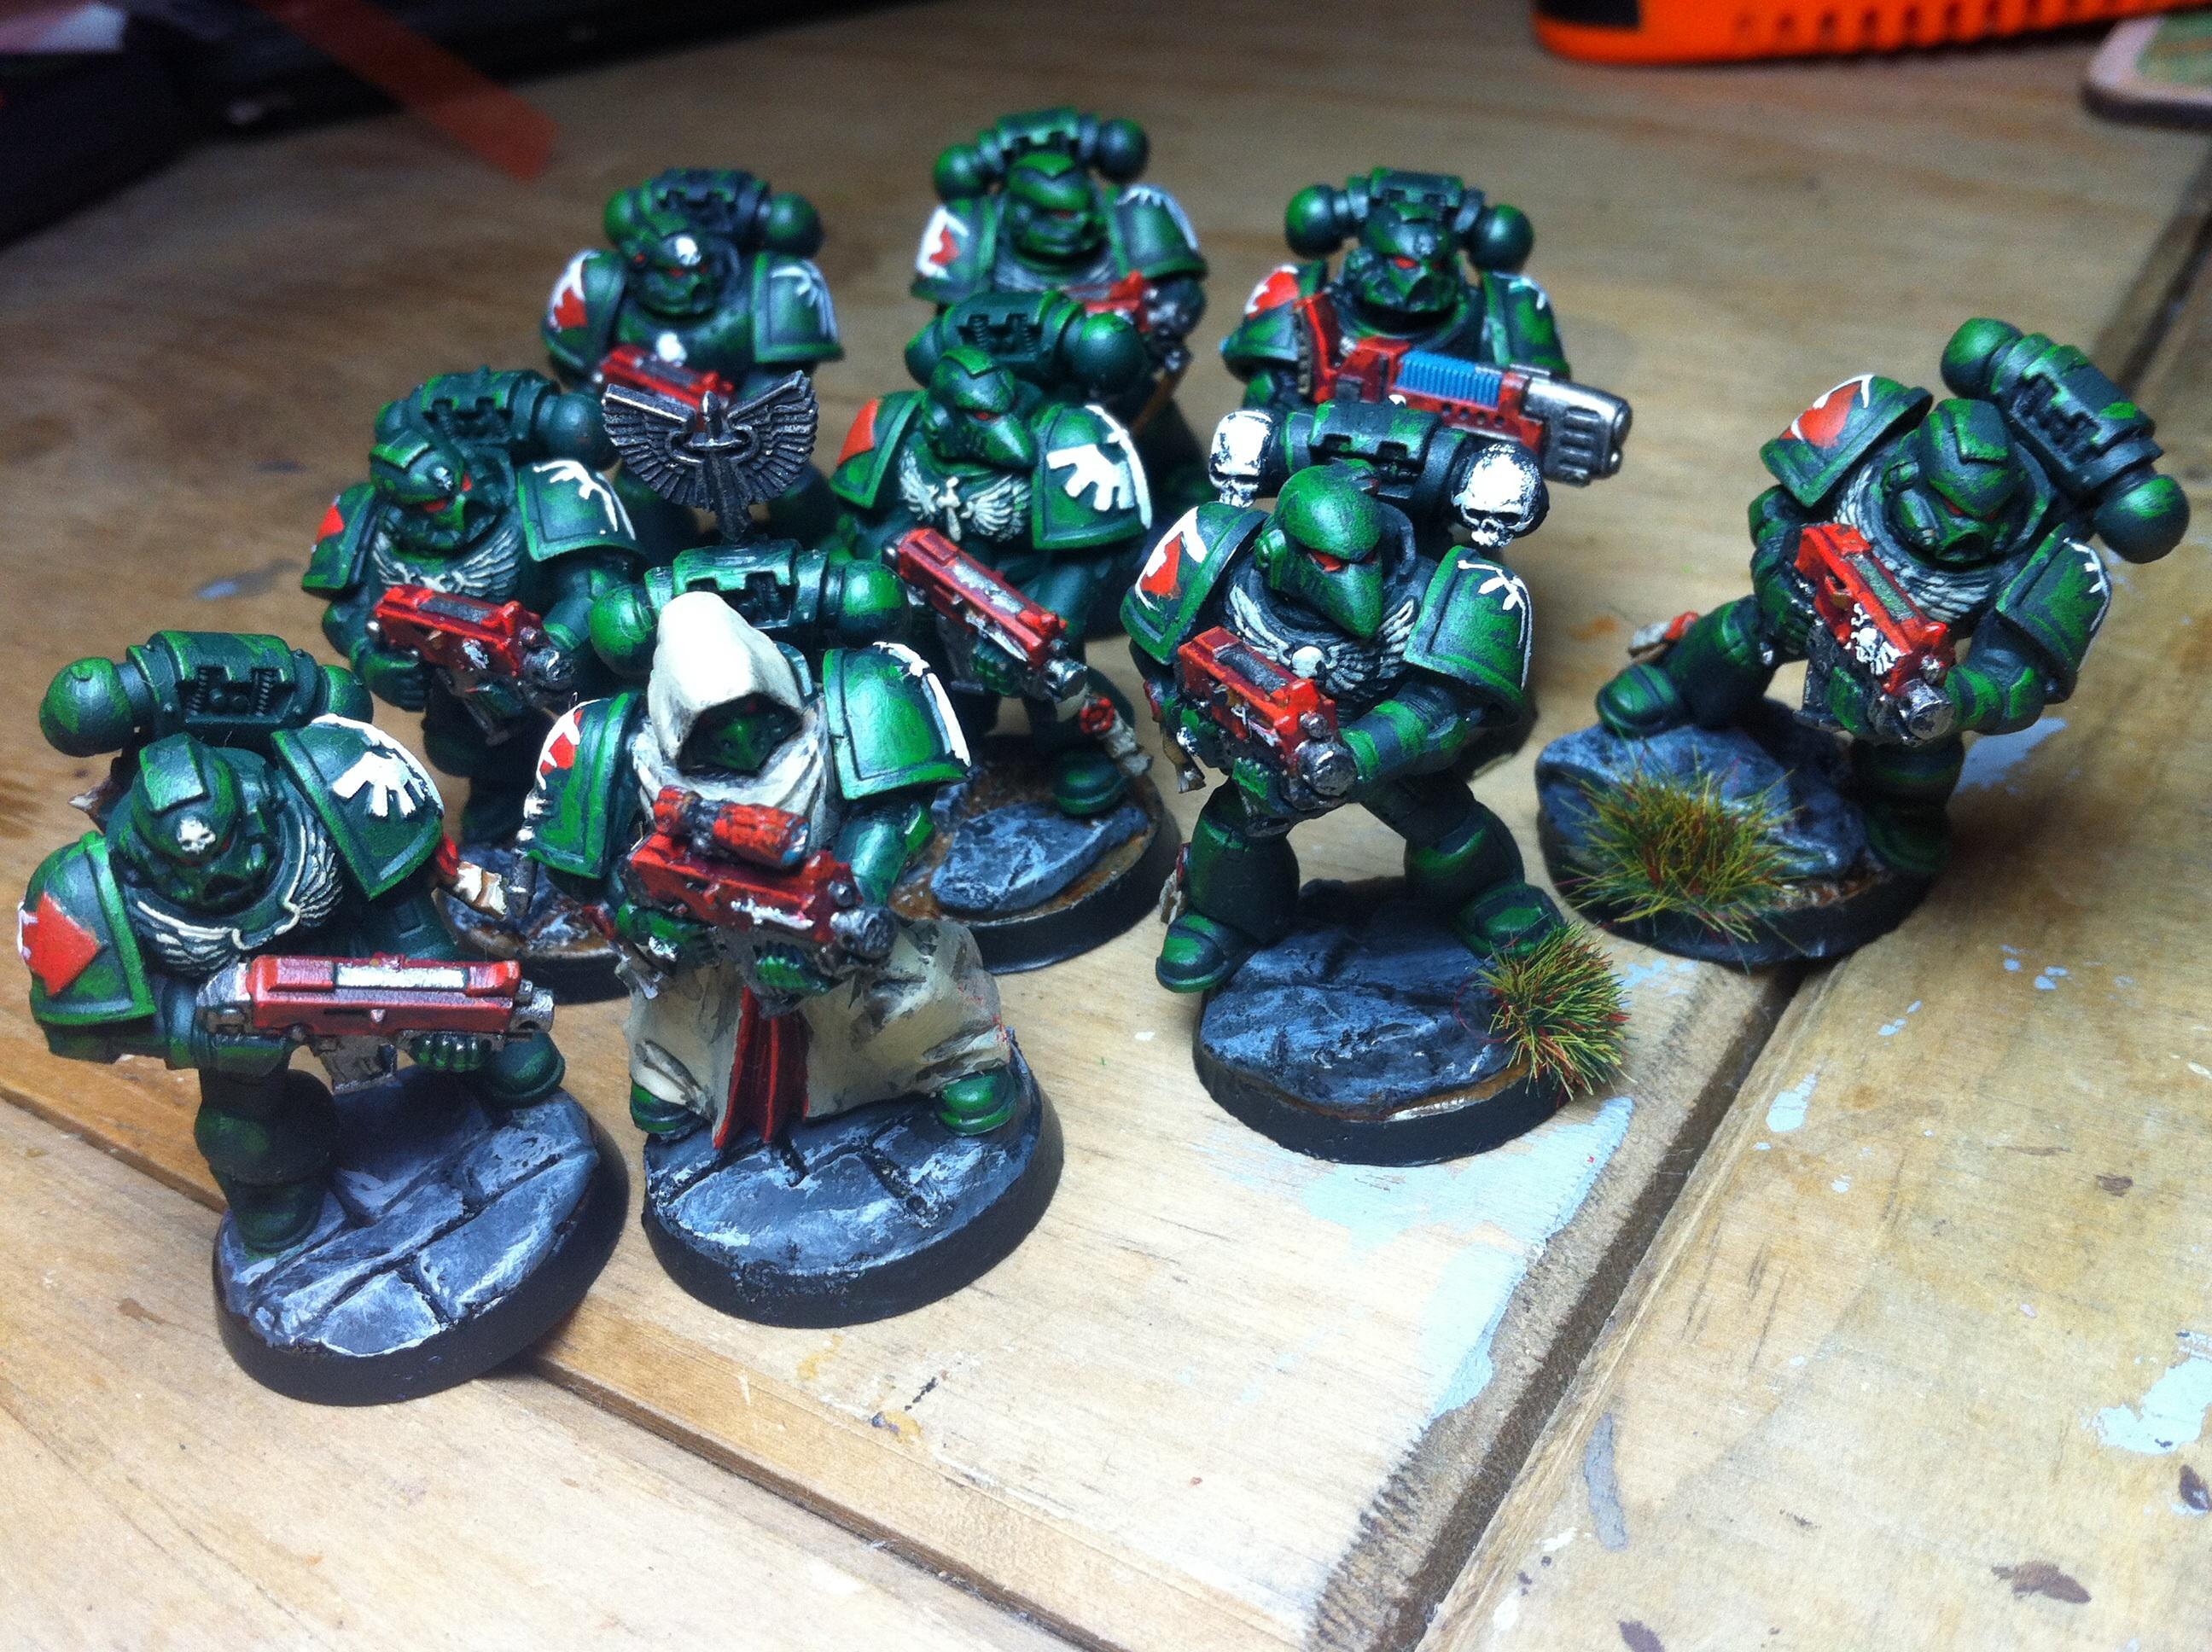 5th Company, Astartes, Bolter, Dark Angels, Dark Vengeance, Imperial, Imperium, Lbsf, Mankind, Painted, Power Armour, Space, Space Marines, Squad Markings, Tactical Squad, Urban Base, Warhammer 40,000